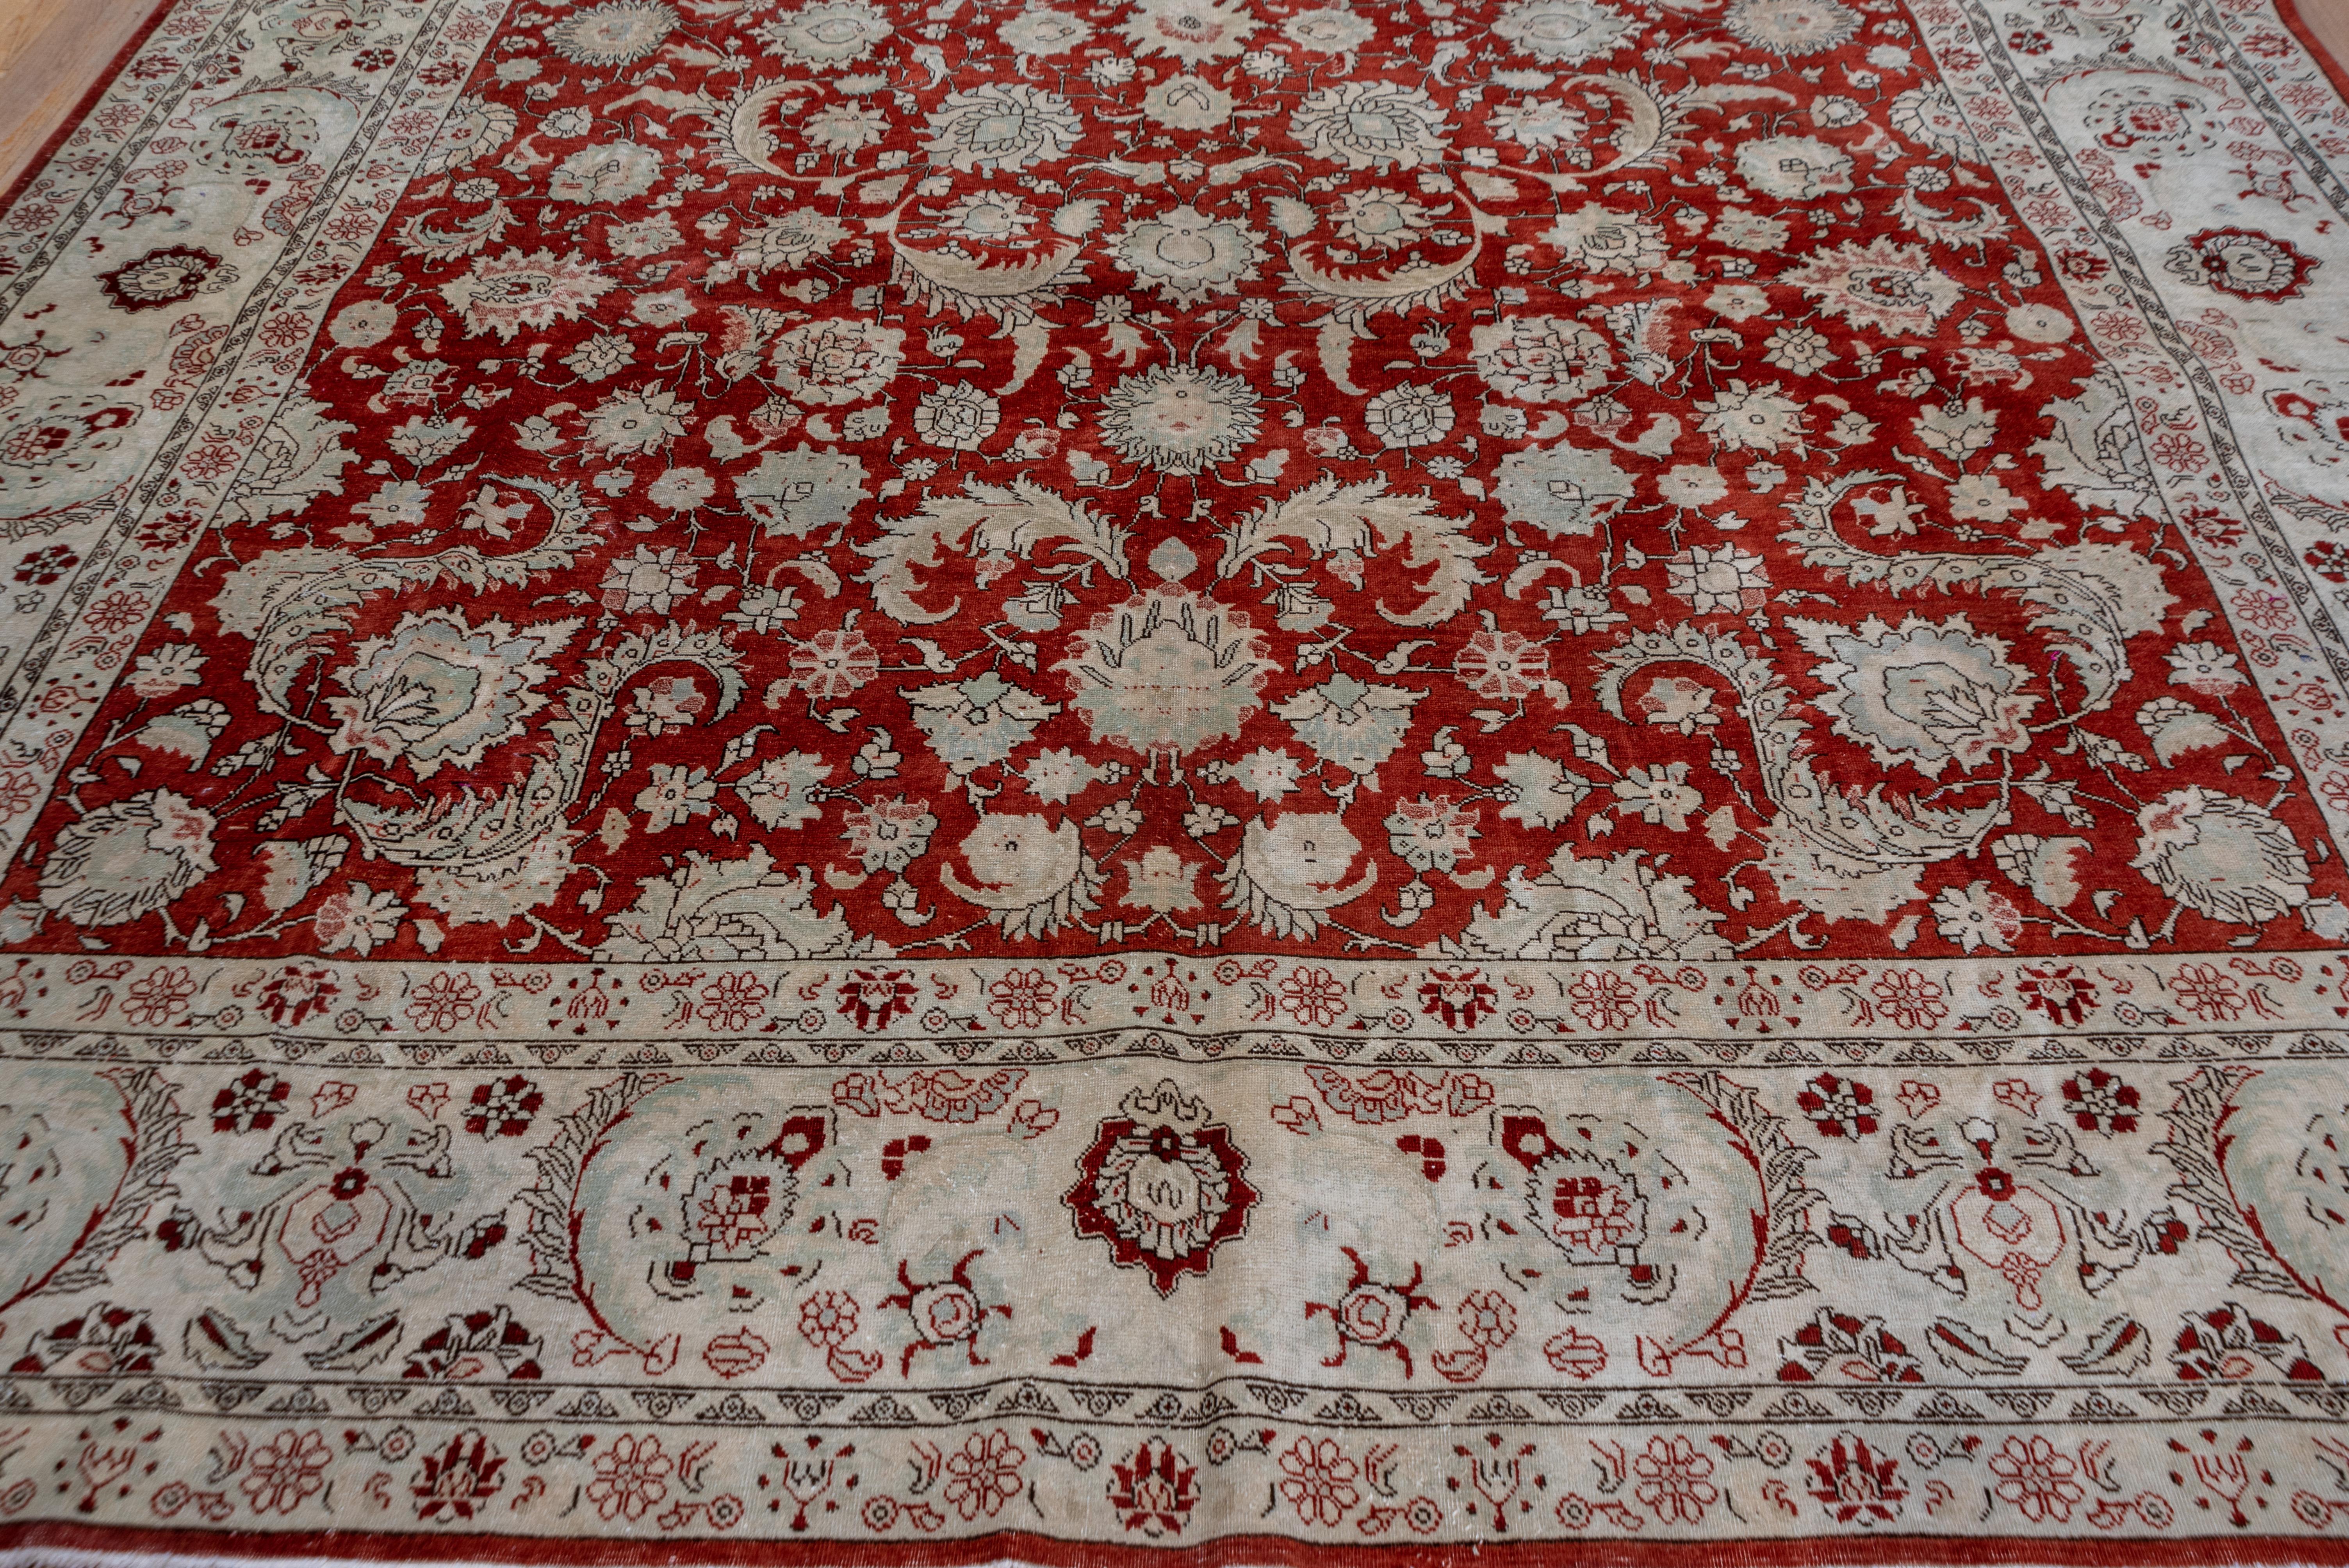 This well-woven Persian Tabriz carpet shows a rich red field fully covered by an allover design of curling and barbed leaves, petal palmettes, rosettes and smaller vegetal devices. The mushroom border presents dark palmettes and barbed sickle leaves